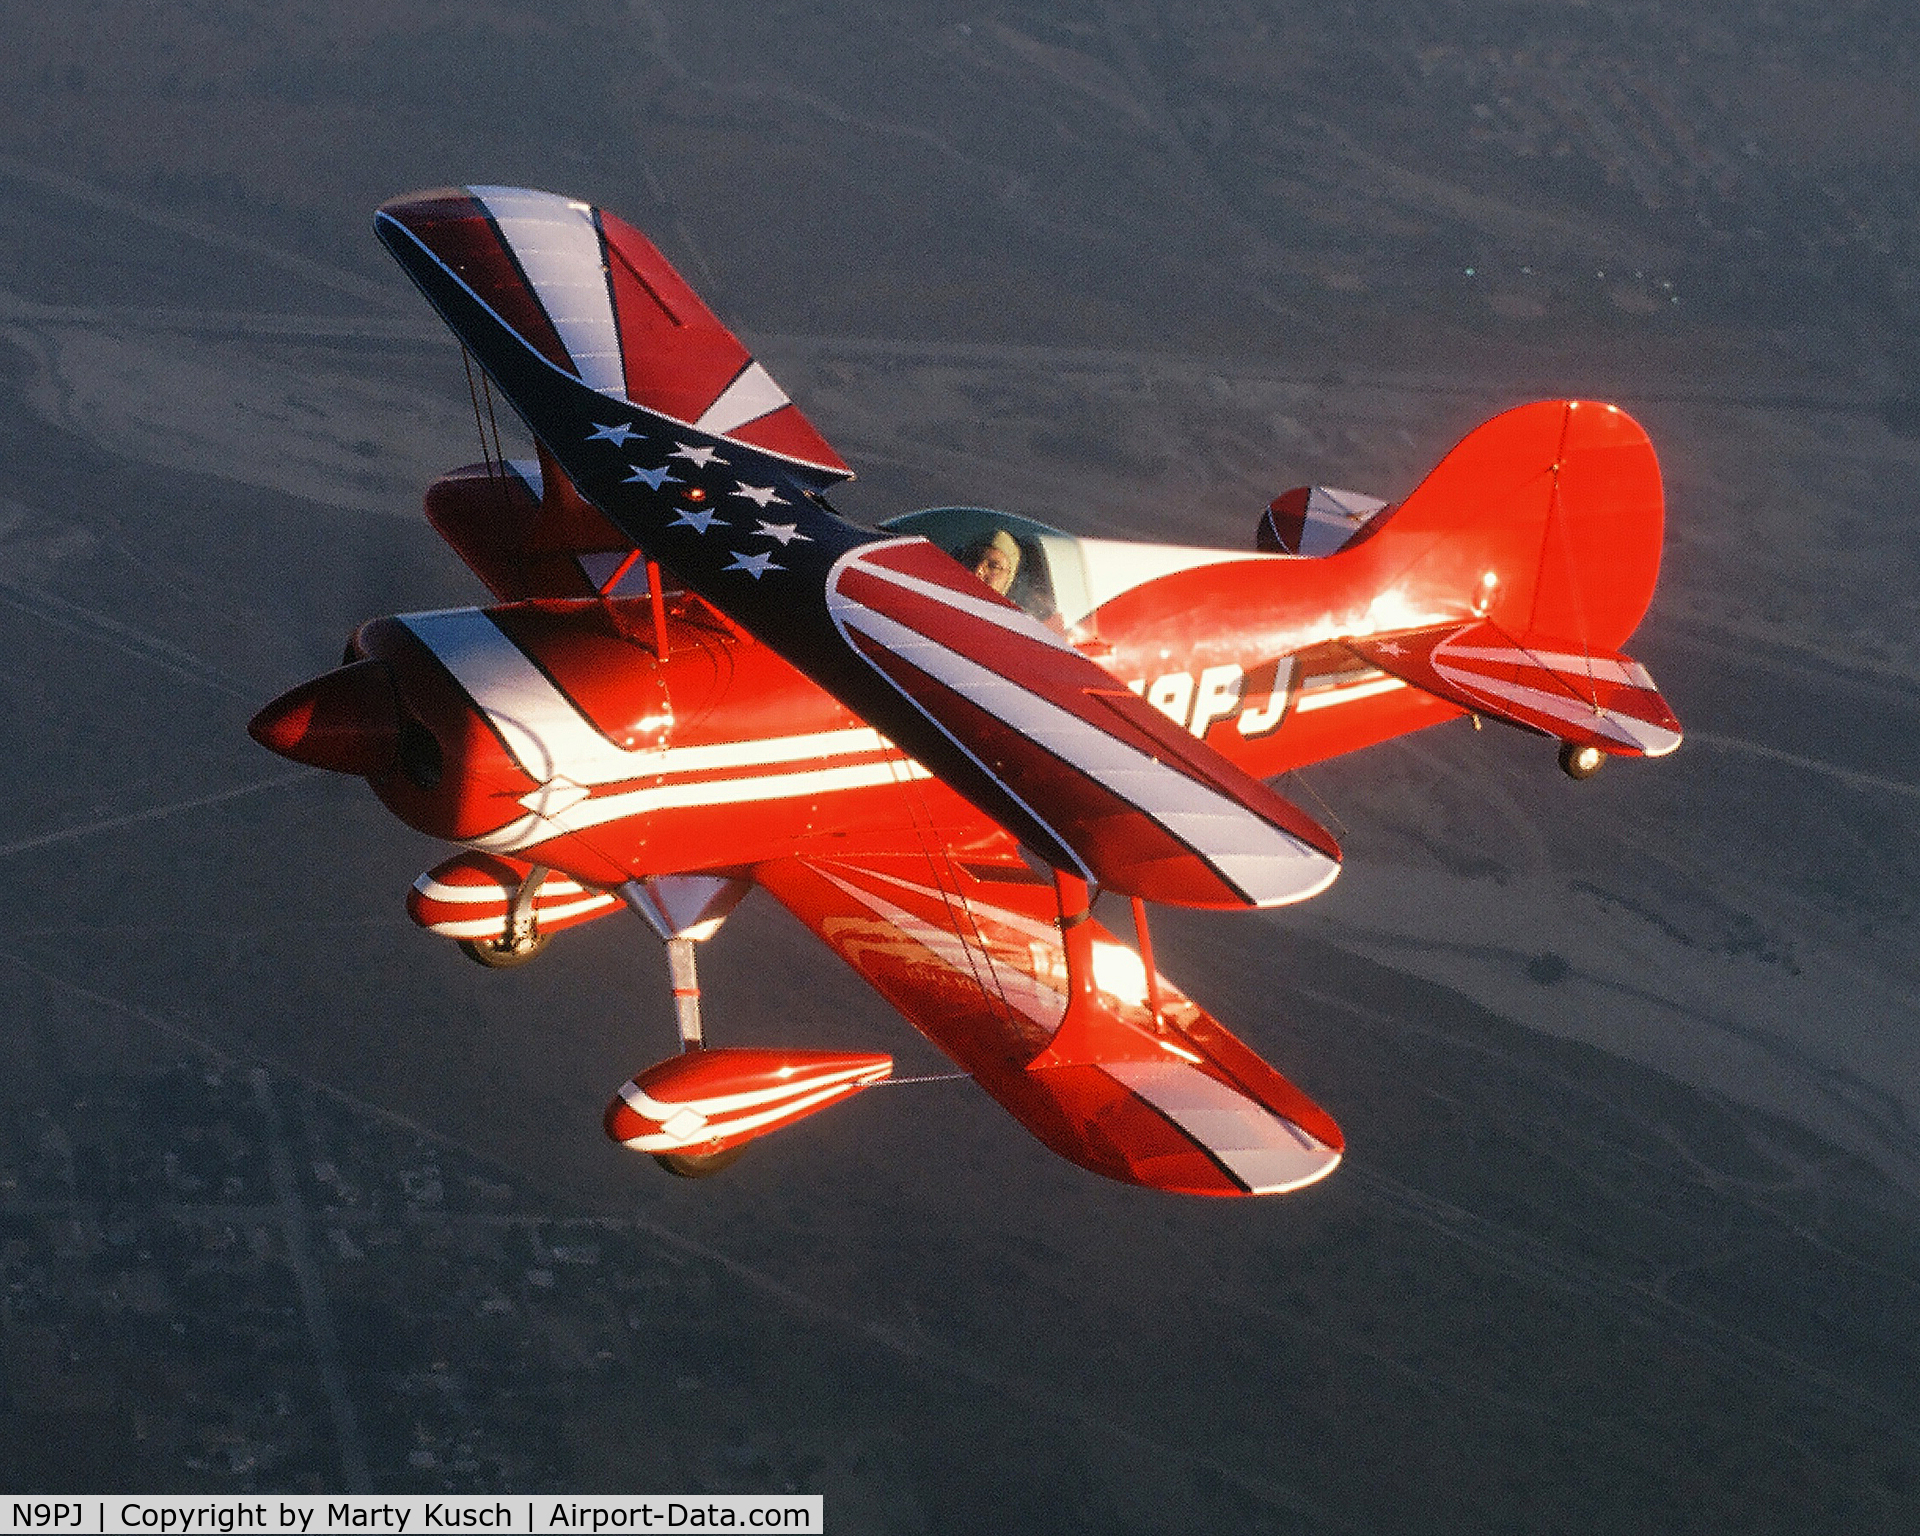 N9PJ, 1976 Aerotek Pitts S-1S Special C/N 1-0037, Formation over Rancho Cucamonga.